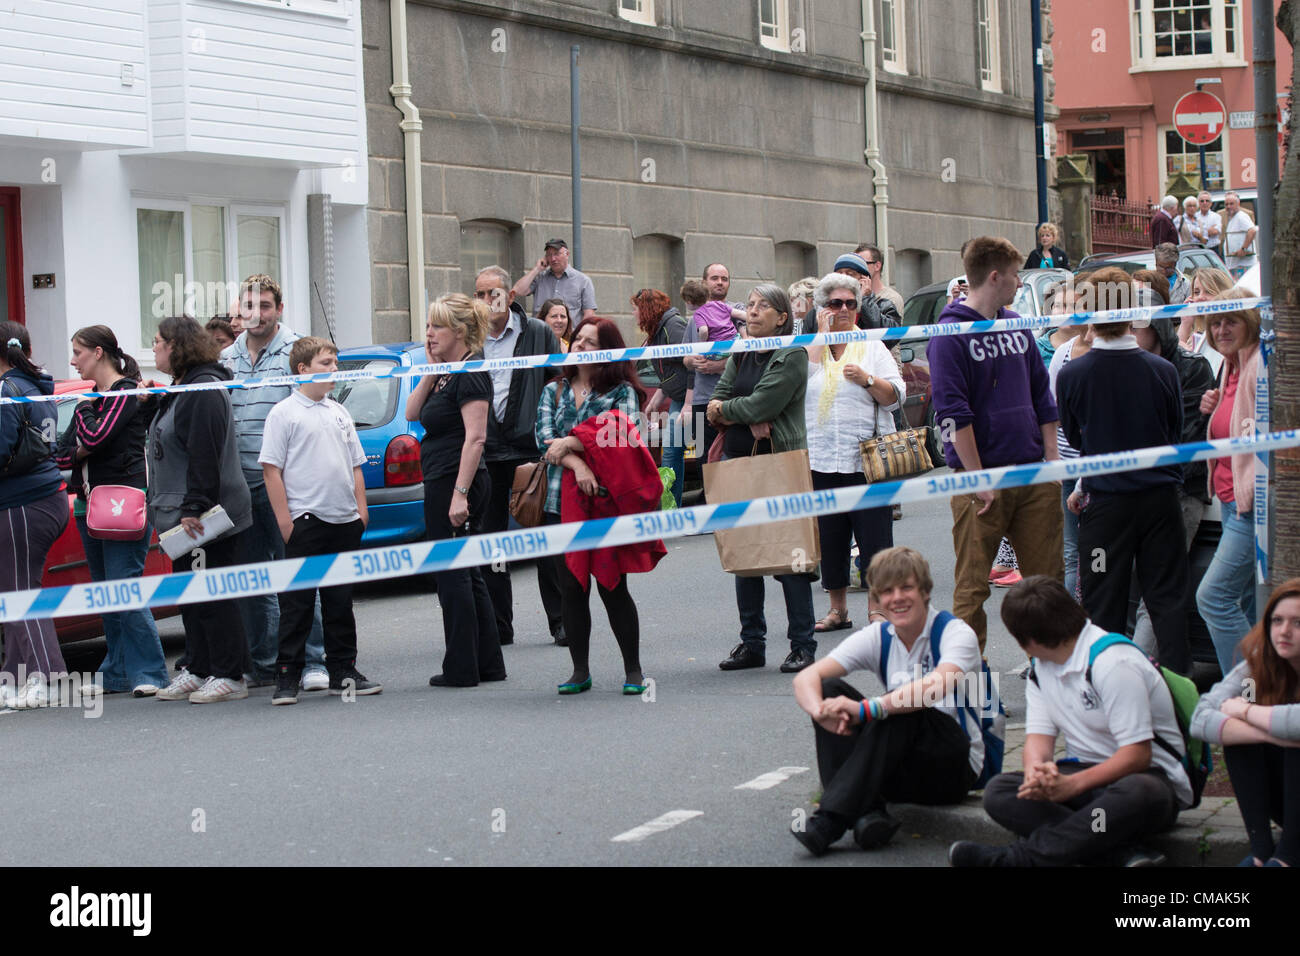 Thursday 5 July 2012 Police were called to a siege in a house in Portland Street, Aberystwyth Wales UK. The centre of the town was sealed off, with cars and pedestrians prevented from moving.  At 16.45 a man in his 40's was led out of the house by officers and taken away for questioning. Stock Photo